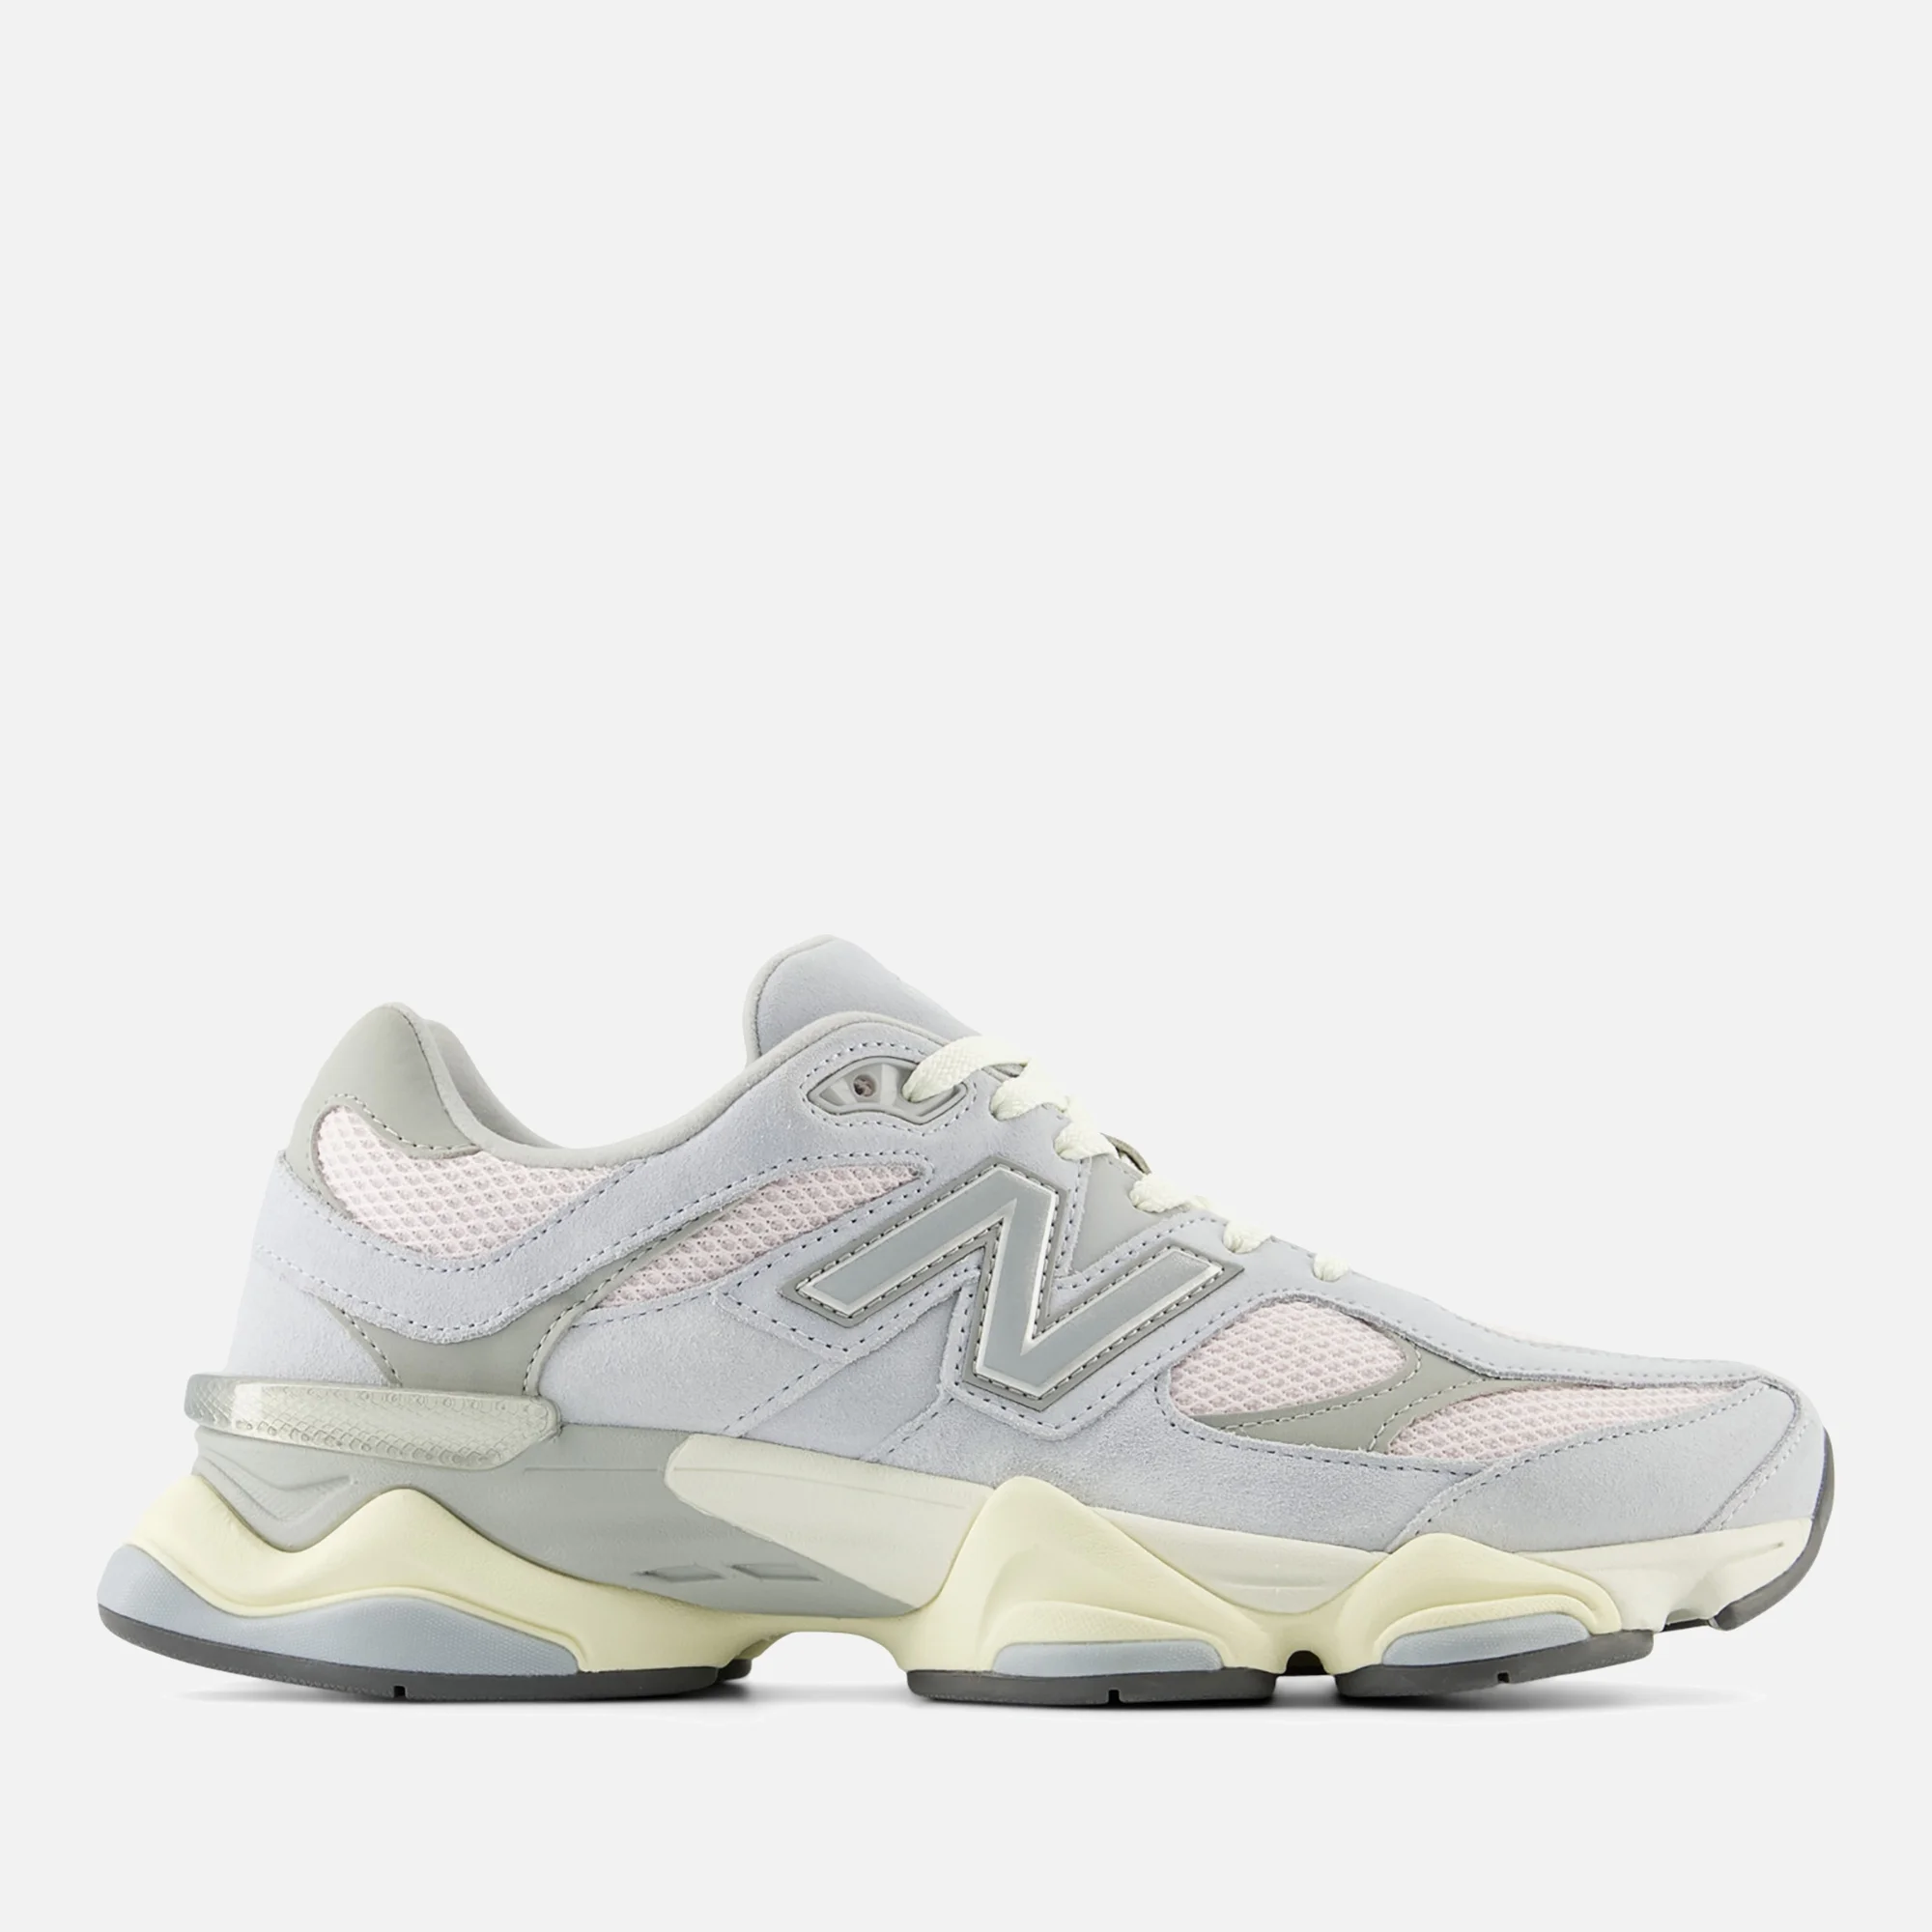 New Balance Women's Suede and Mesh 9060 Trainers Image 1